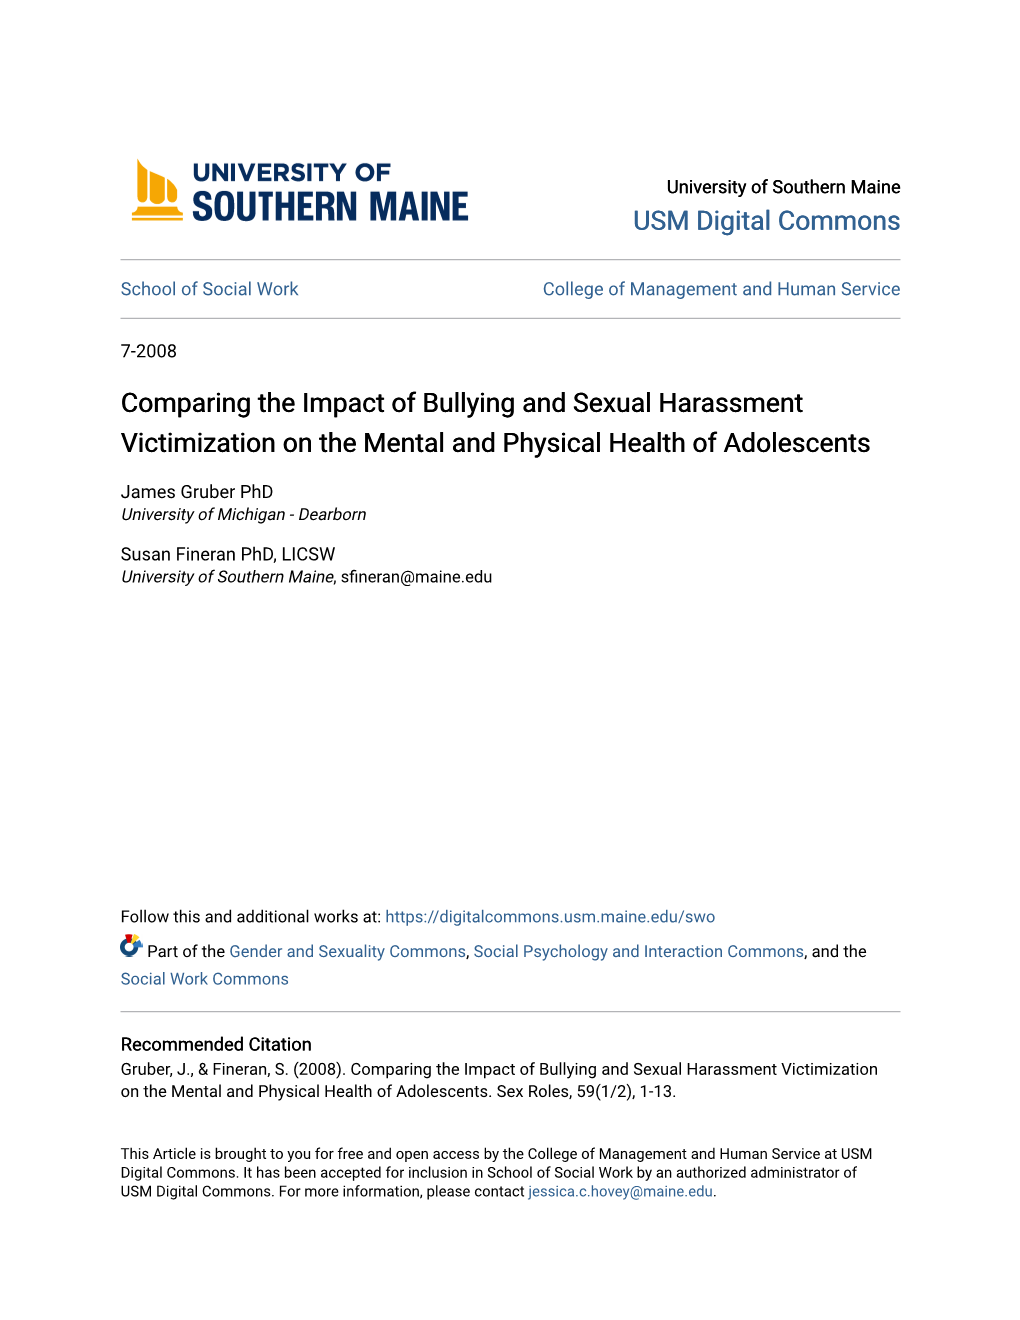 Comparing the Impact of Bullying and Sexual Harassment Victimization on the Mental and Physical Health of Adolescents